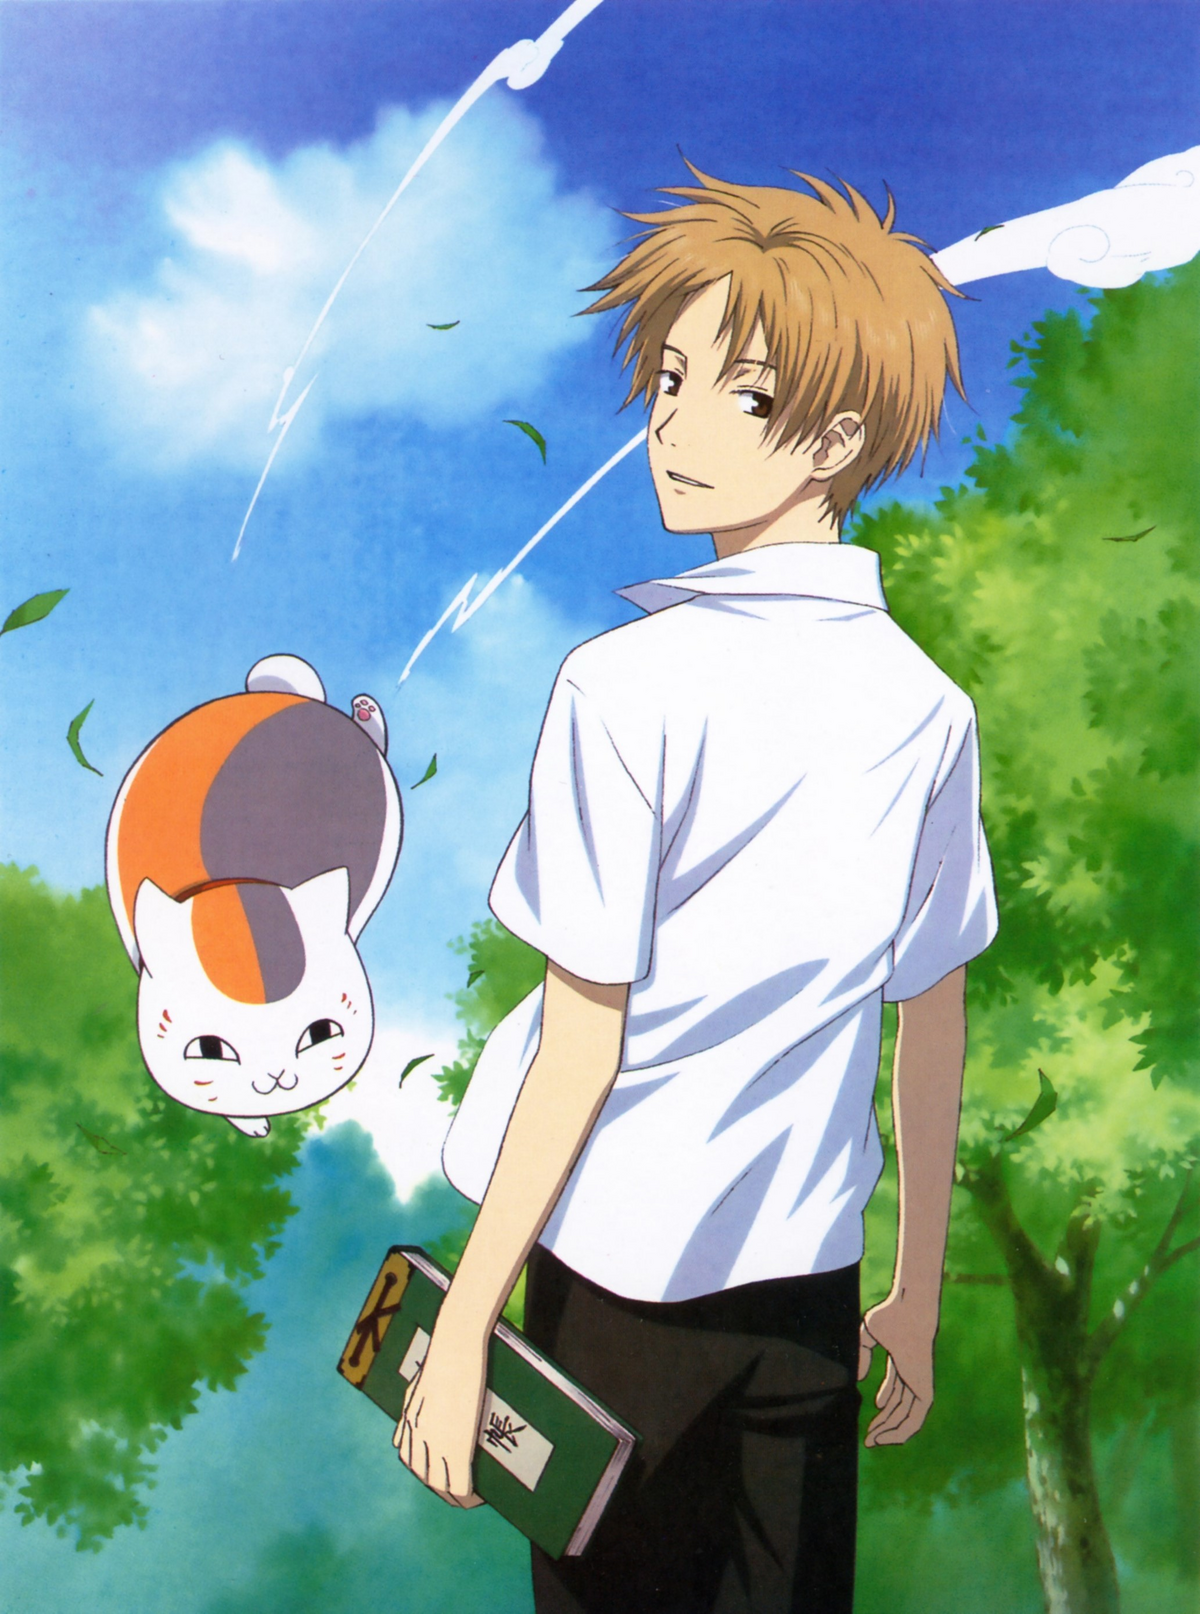 Wallpaper anime, art, two, friends, characters, natsume yuujinchou, Book of  friendship Natsume images for desktop, section сёнэн - download